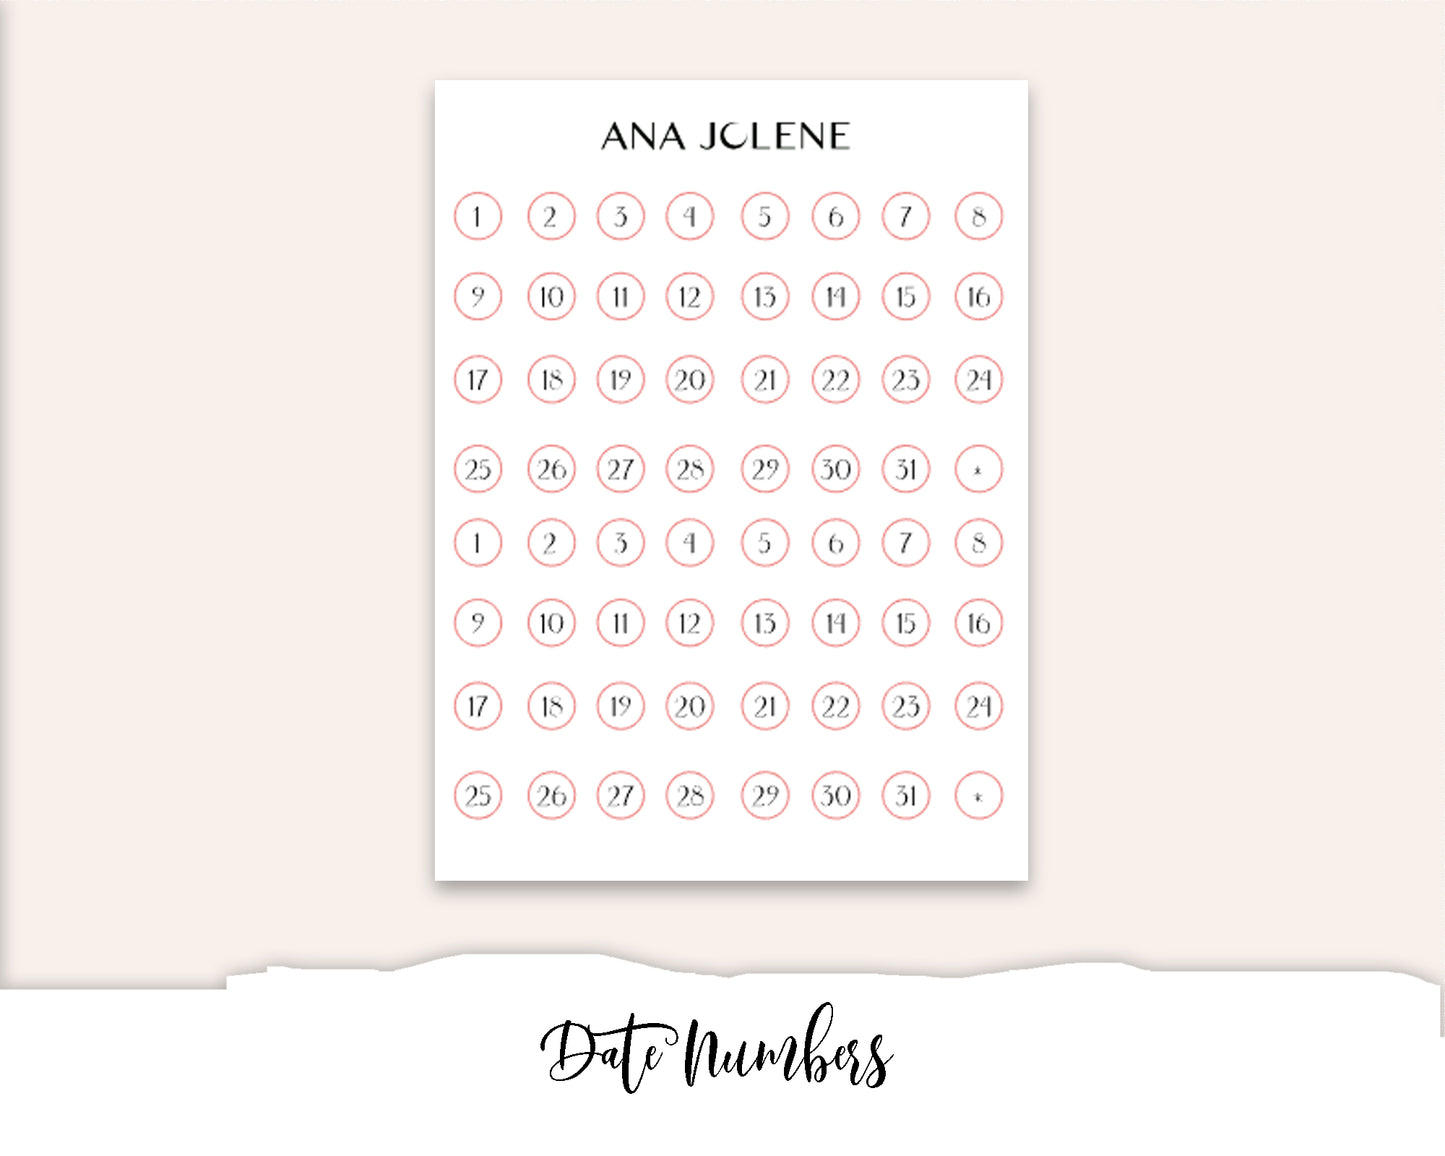 BOOKS AND COFFEE Planner Sticker Kit (Vertical Weekly)